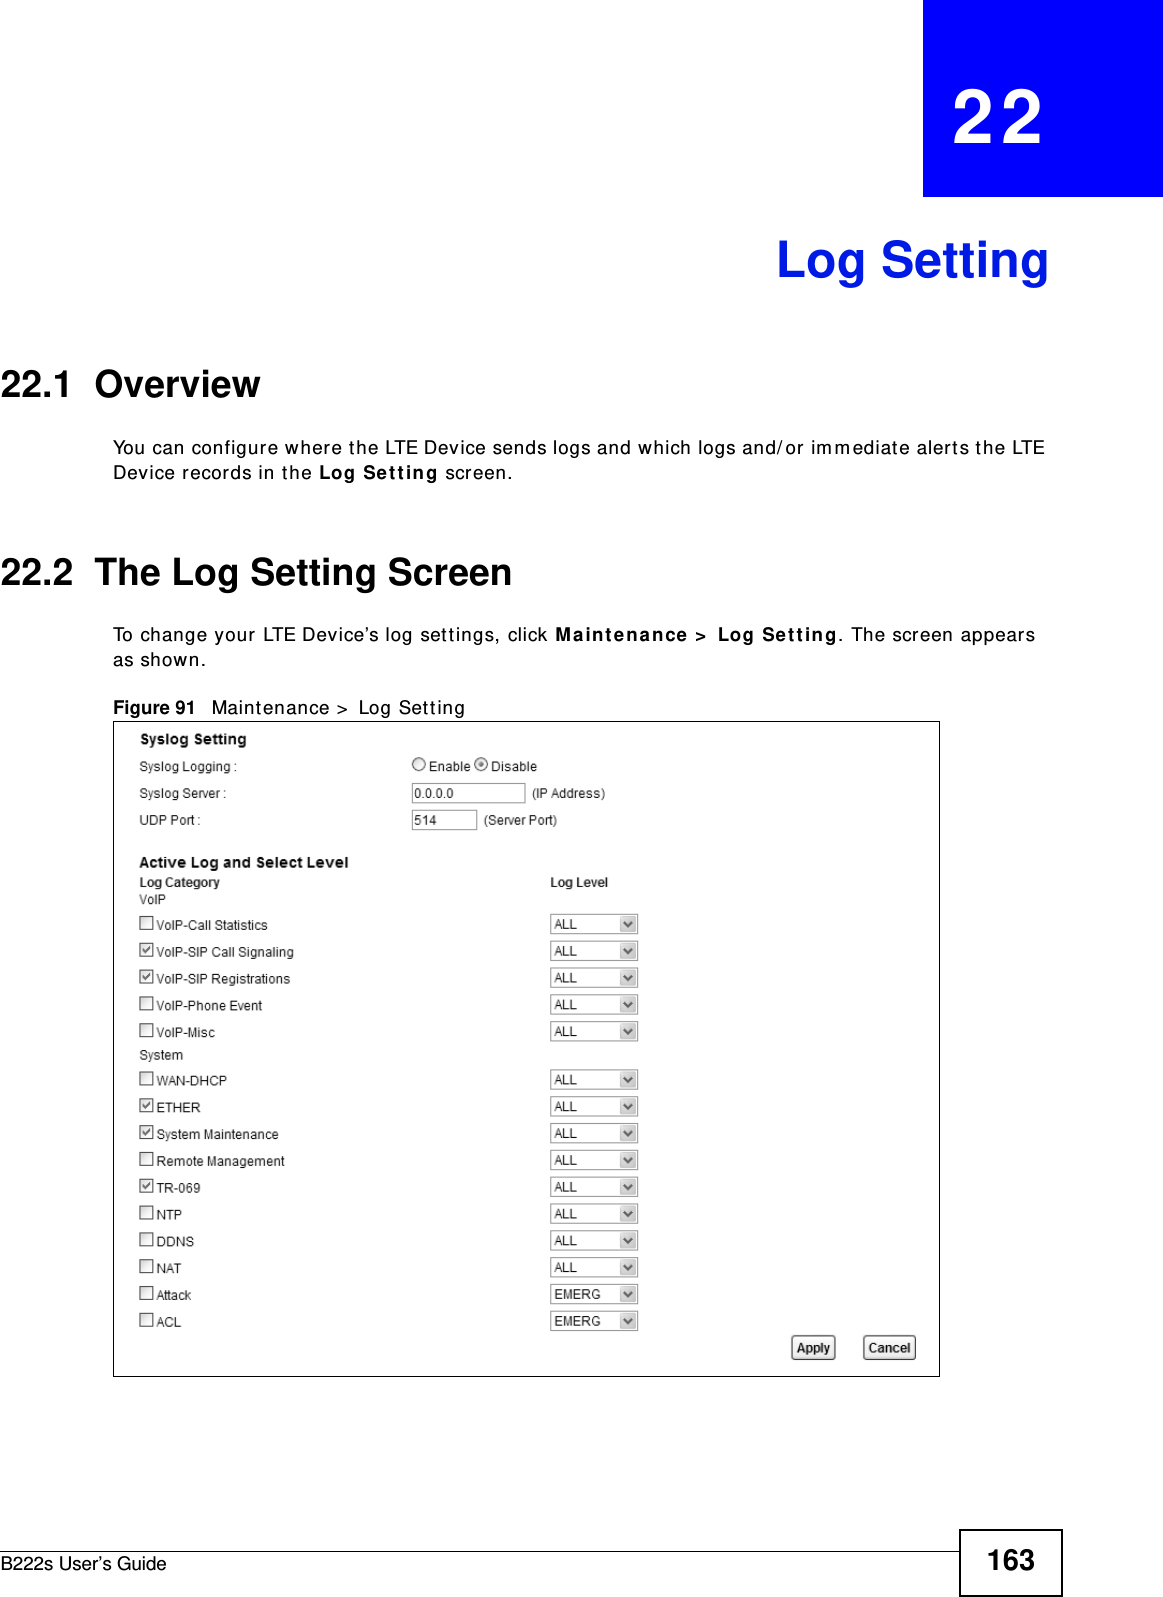 B222s User’s Guide 163CHAPTER   22Log Setting22.1  Overview You can configure where t he LTE Device sends logs and which logs and/ or im m ediate alerts t he LTE Device records in the Log Set t ing screen.22.2  The Log Setting ScreenTo change your LTE Device’s log sett ings, click Maint enance &gt;  Log Se t t in g. The screen appears as shown.Figure 91   Maint enance &gt;  Log Set t ing